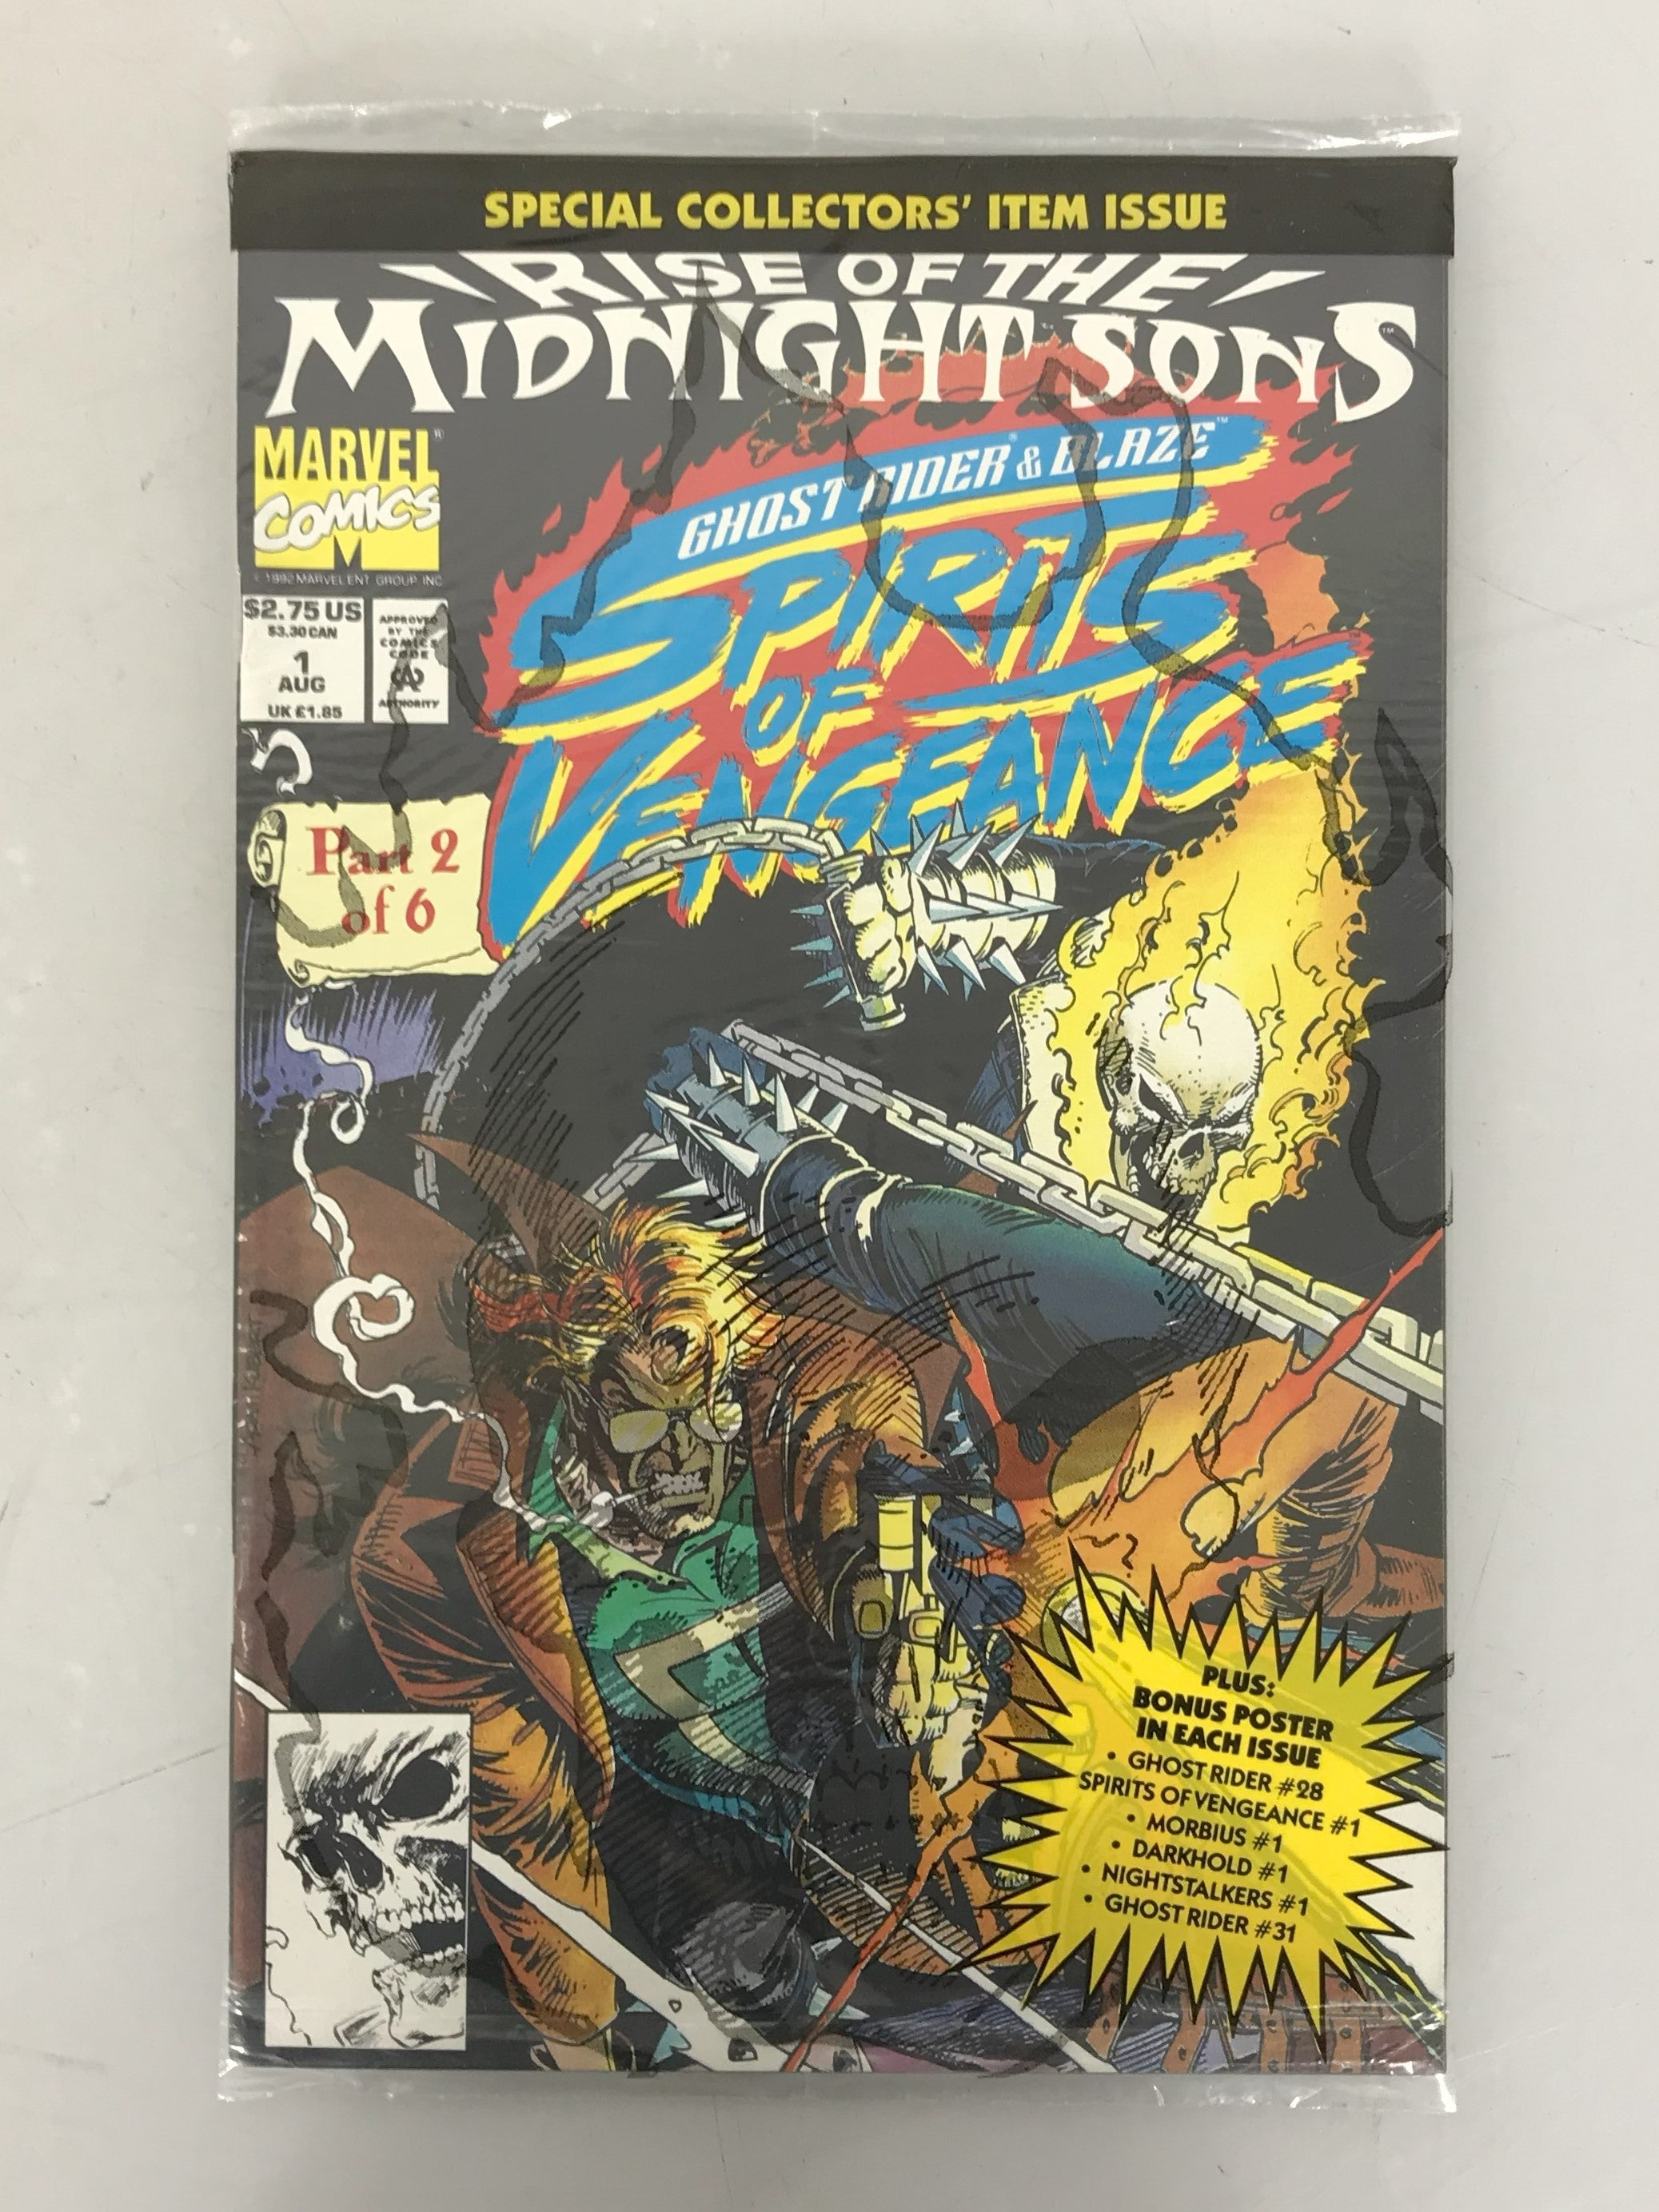 Ghost Rider/Blaze: Spirit of Vengeance 1 1992 Special Collector's Item Issue